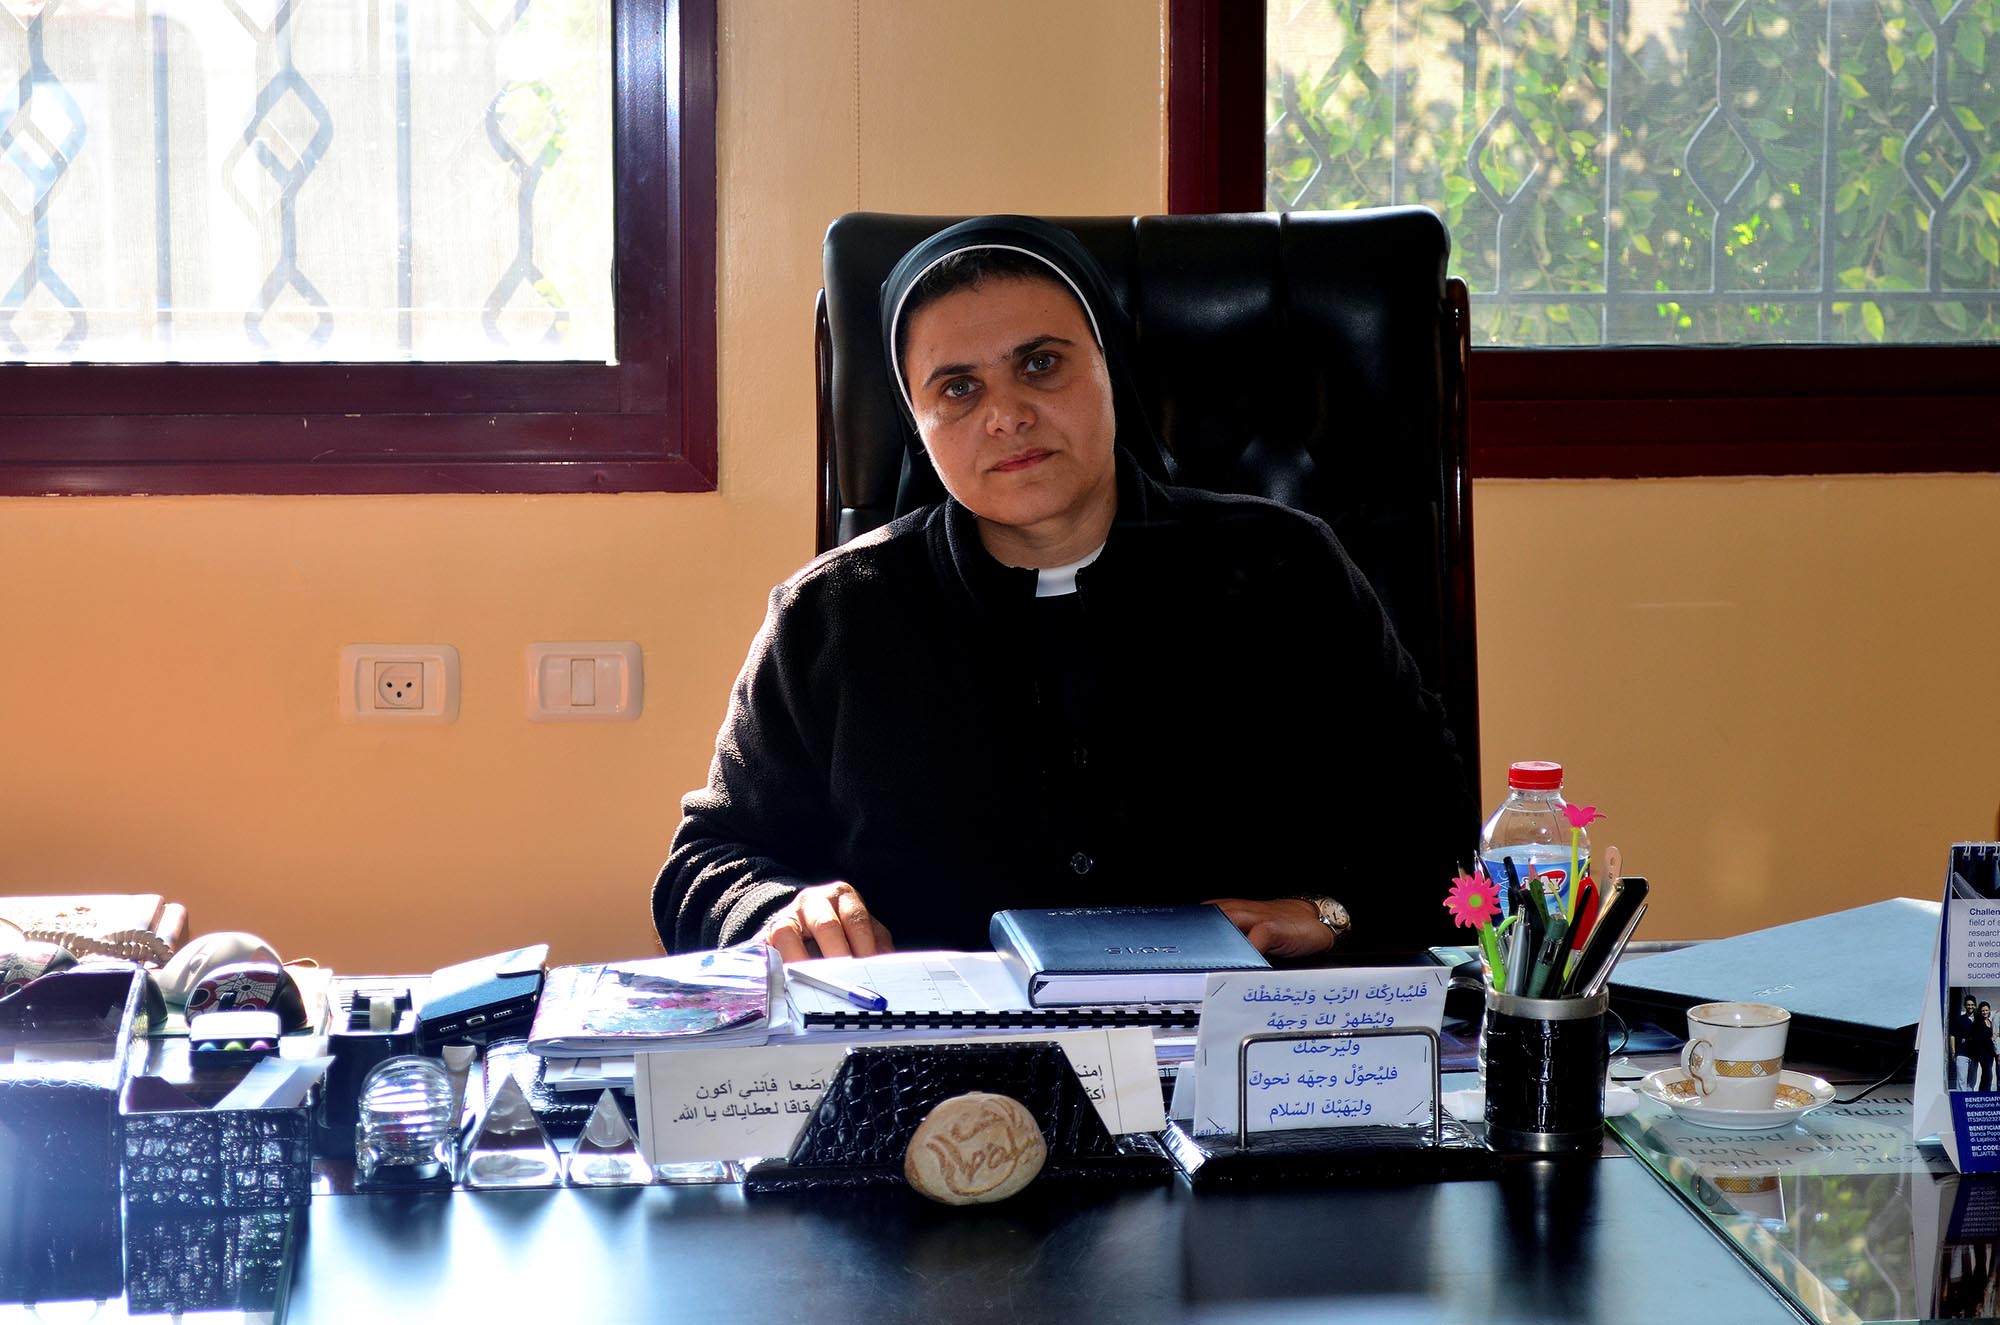 The Rosary School hosts 980 students, 80 teachers and 11 workers, according to the principal, Sister Nabila.